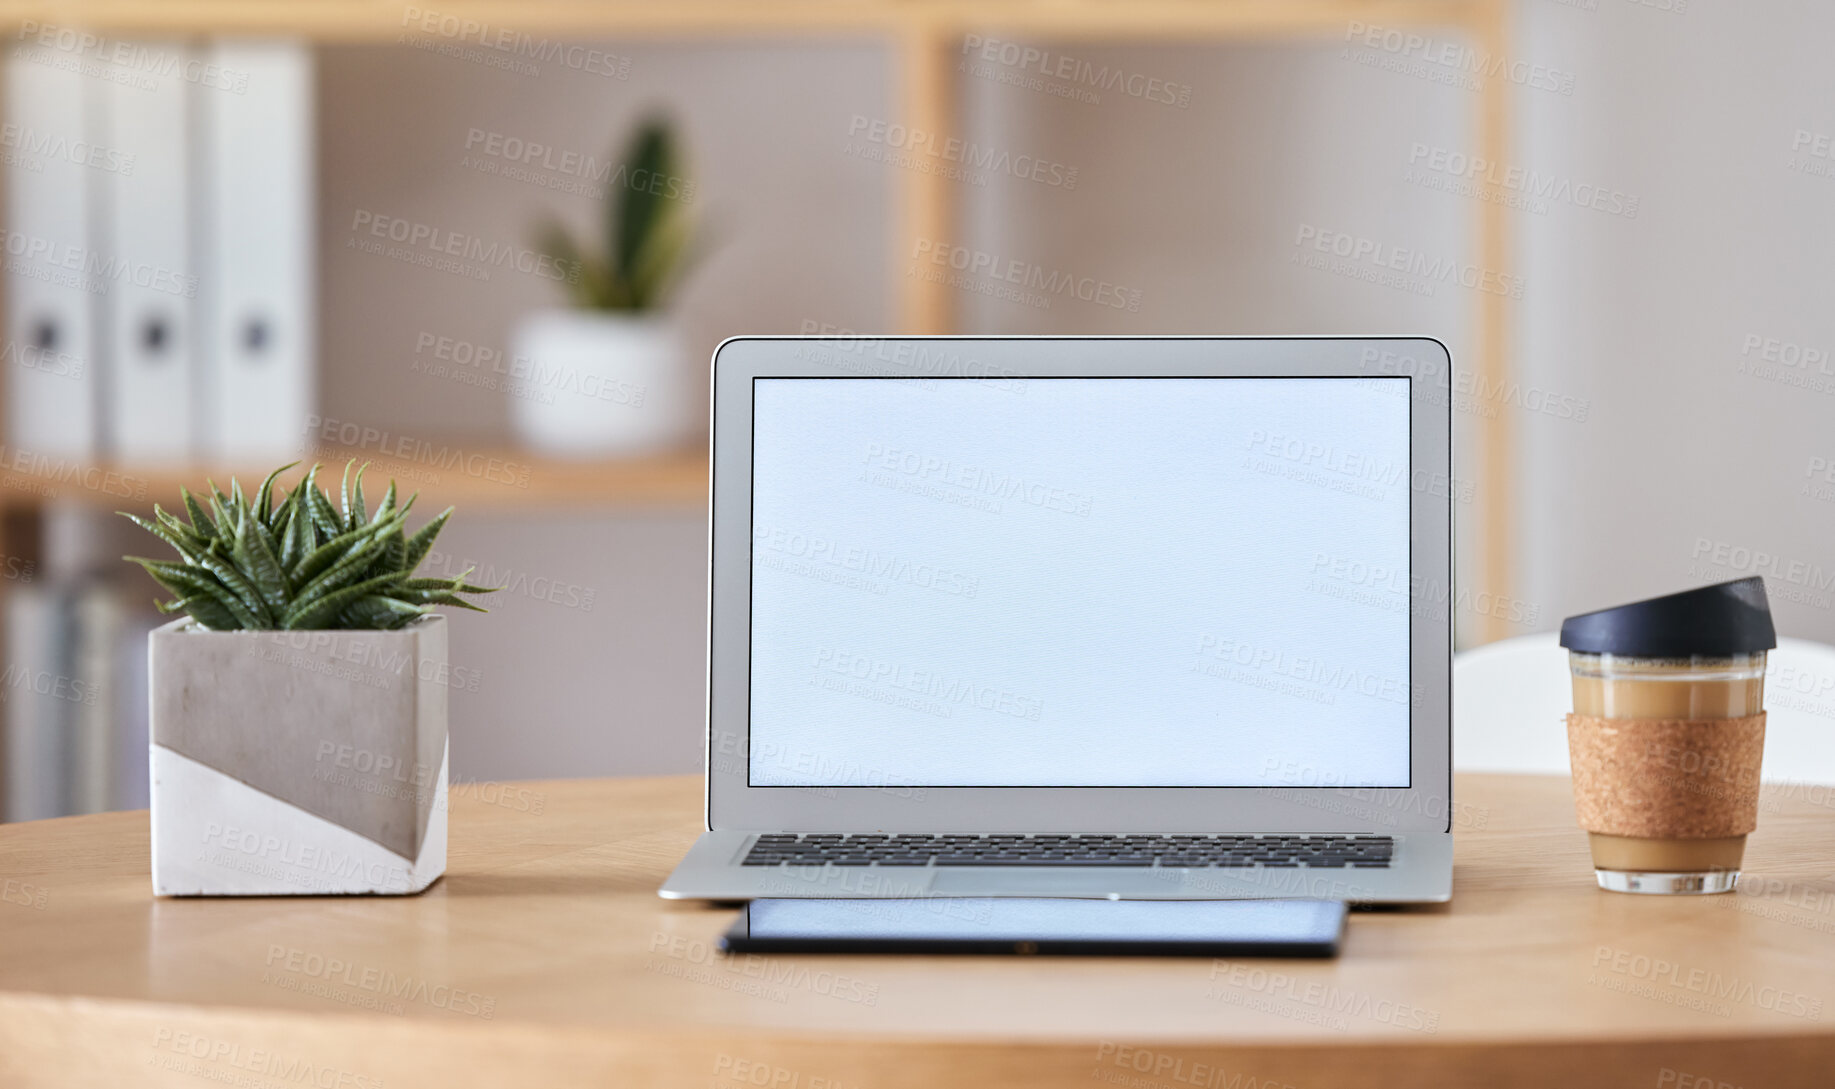 Buy stock photo Mockup laptop, coffee and tablet on desk at home office of  freelance SEO, UX or digital social media marketing and advertising freelancer. Internet or online work from home remote workspace